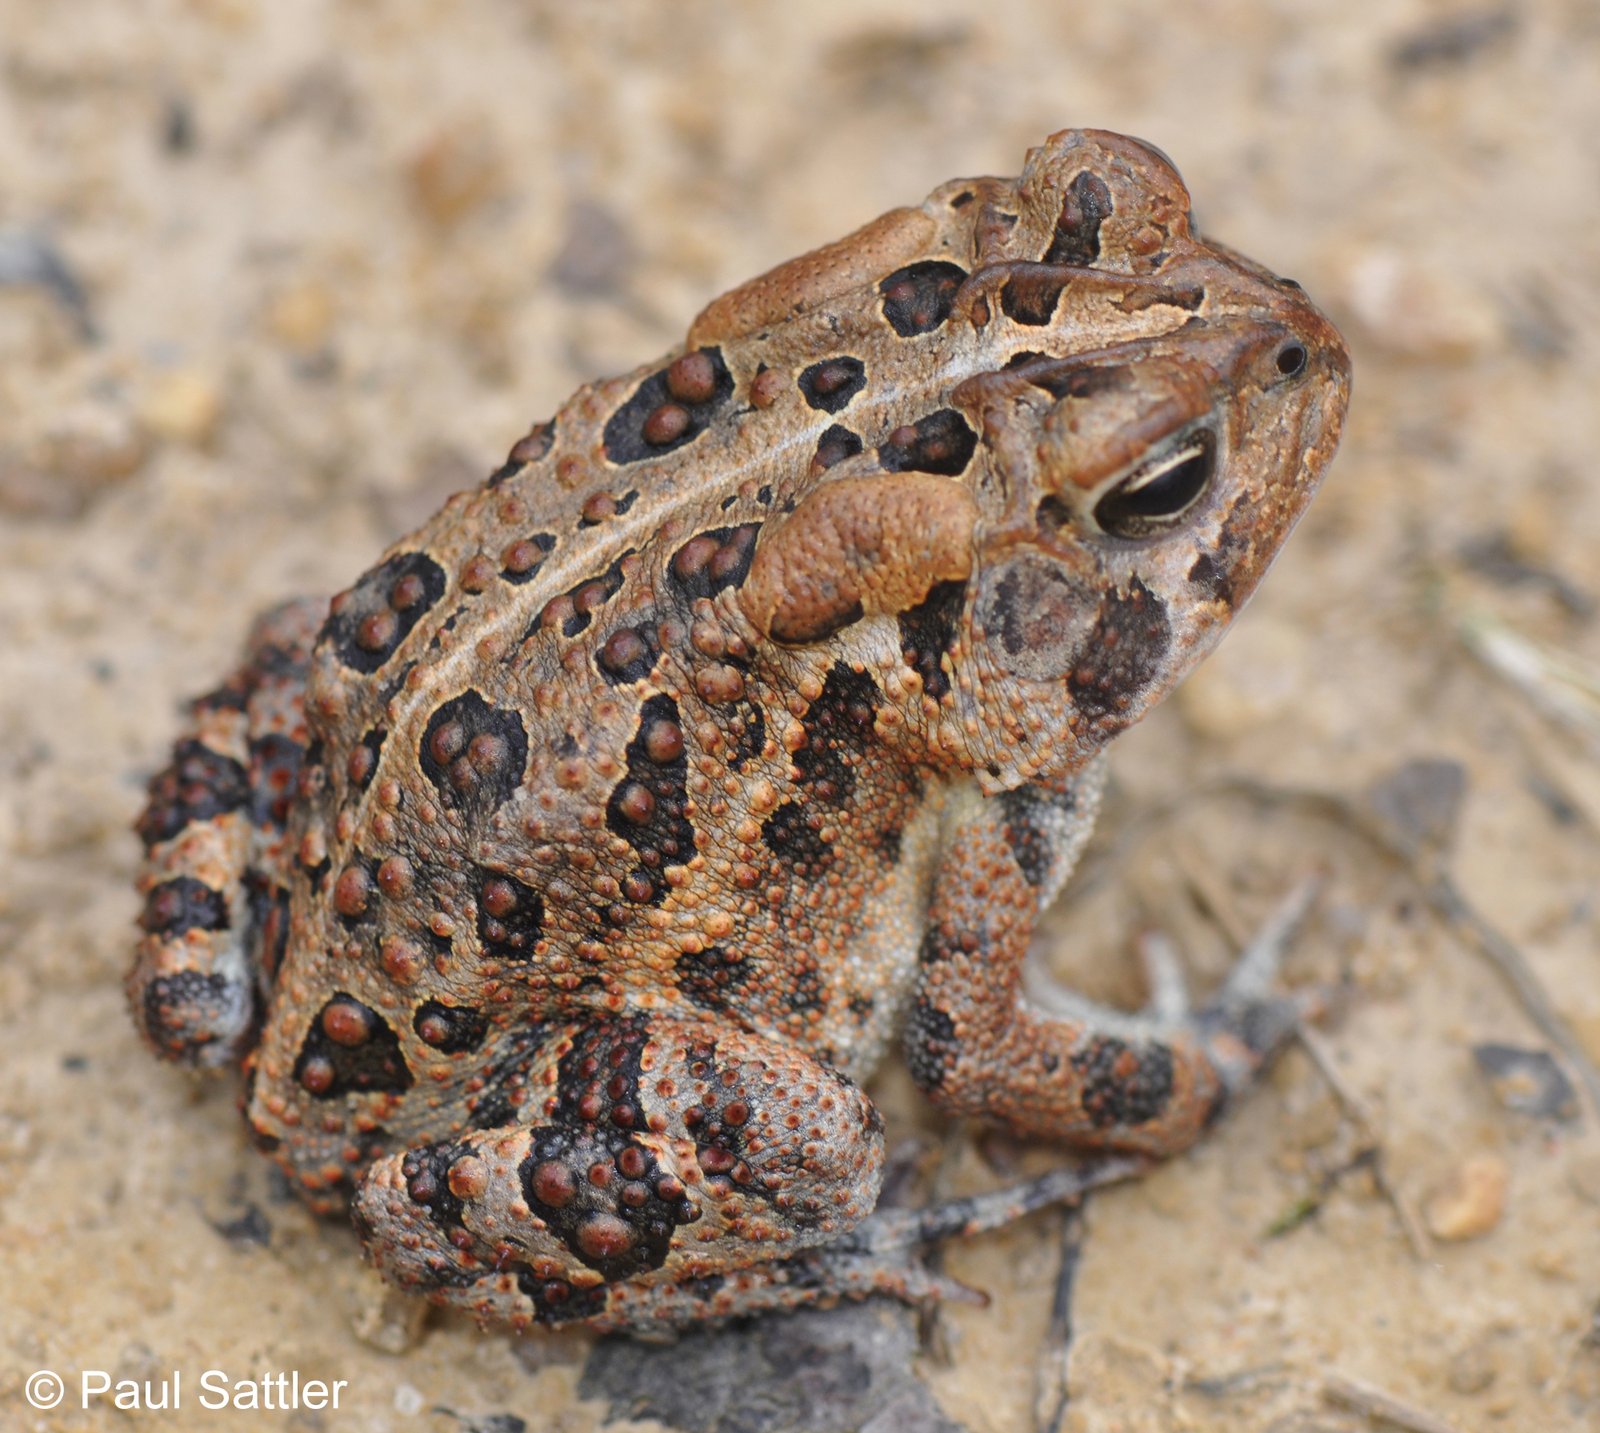 How Long Do Southern Toads Live?